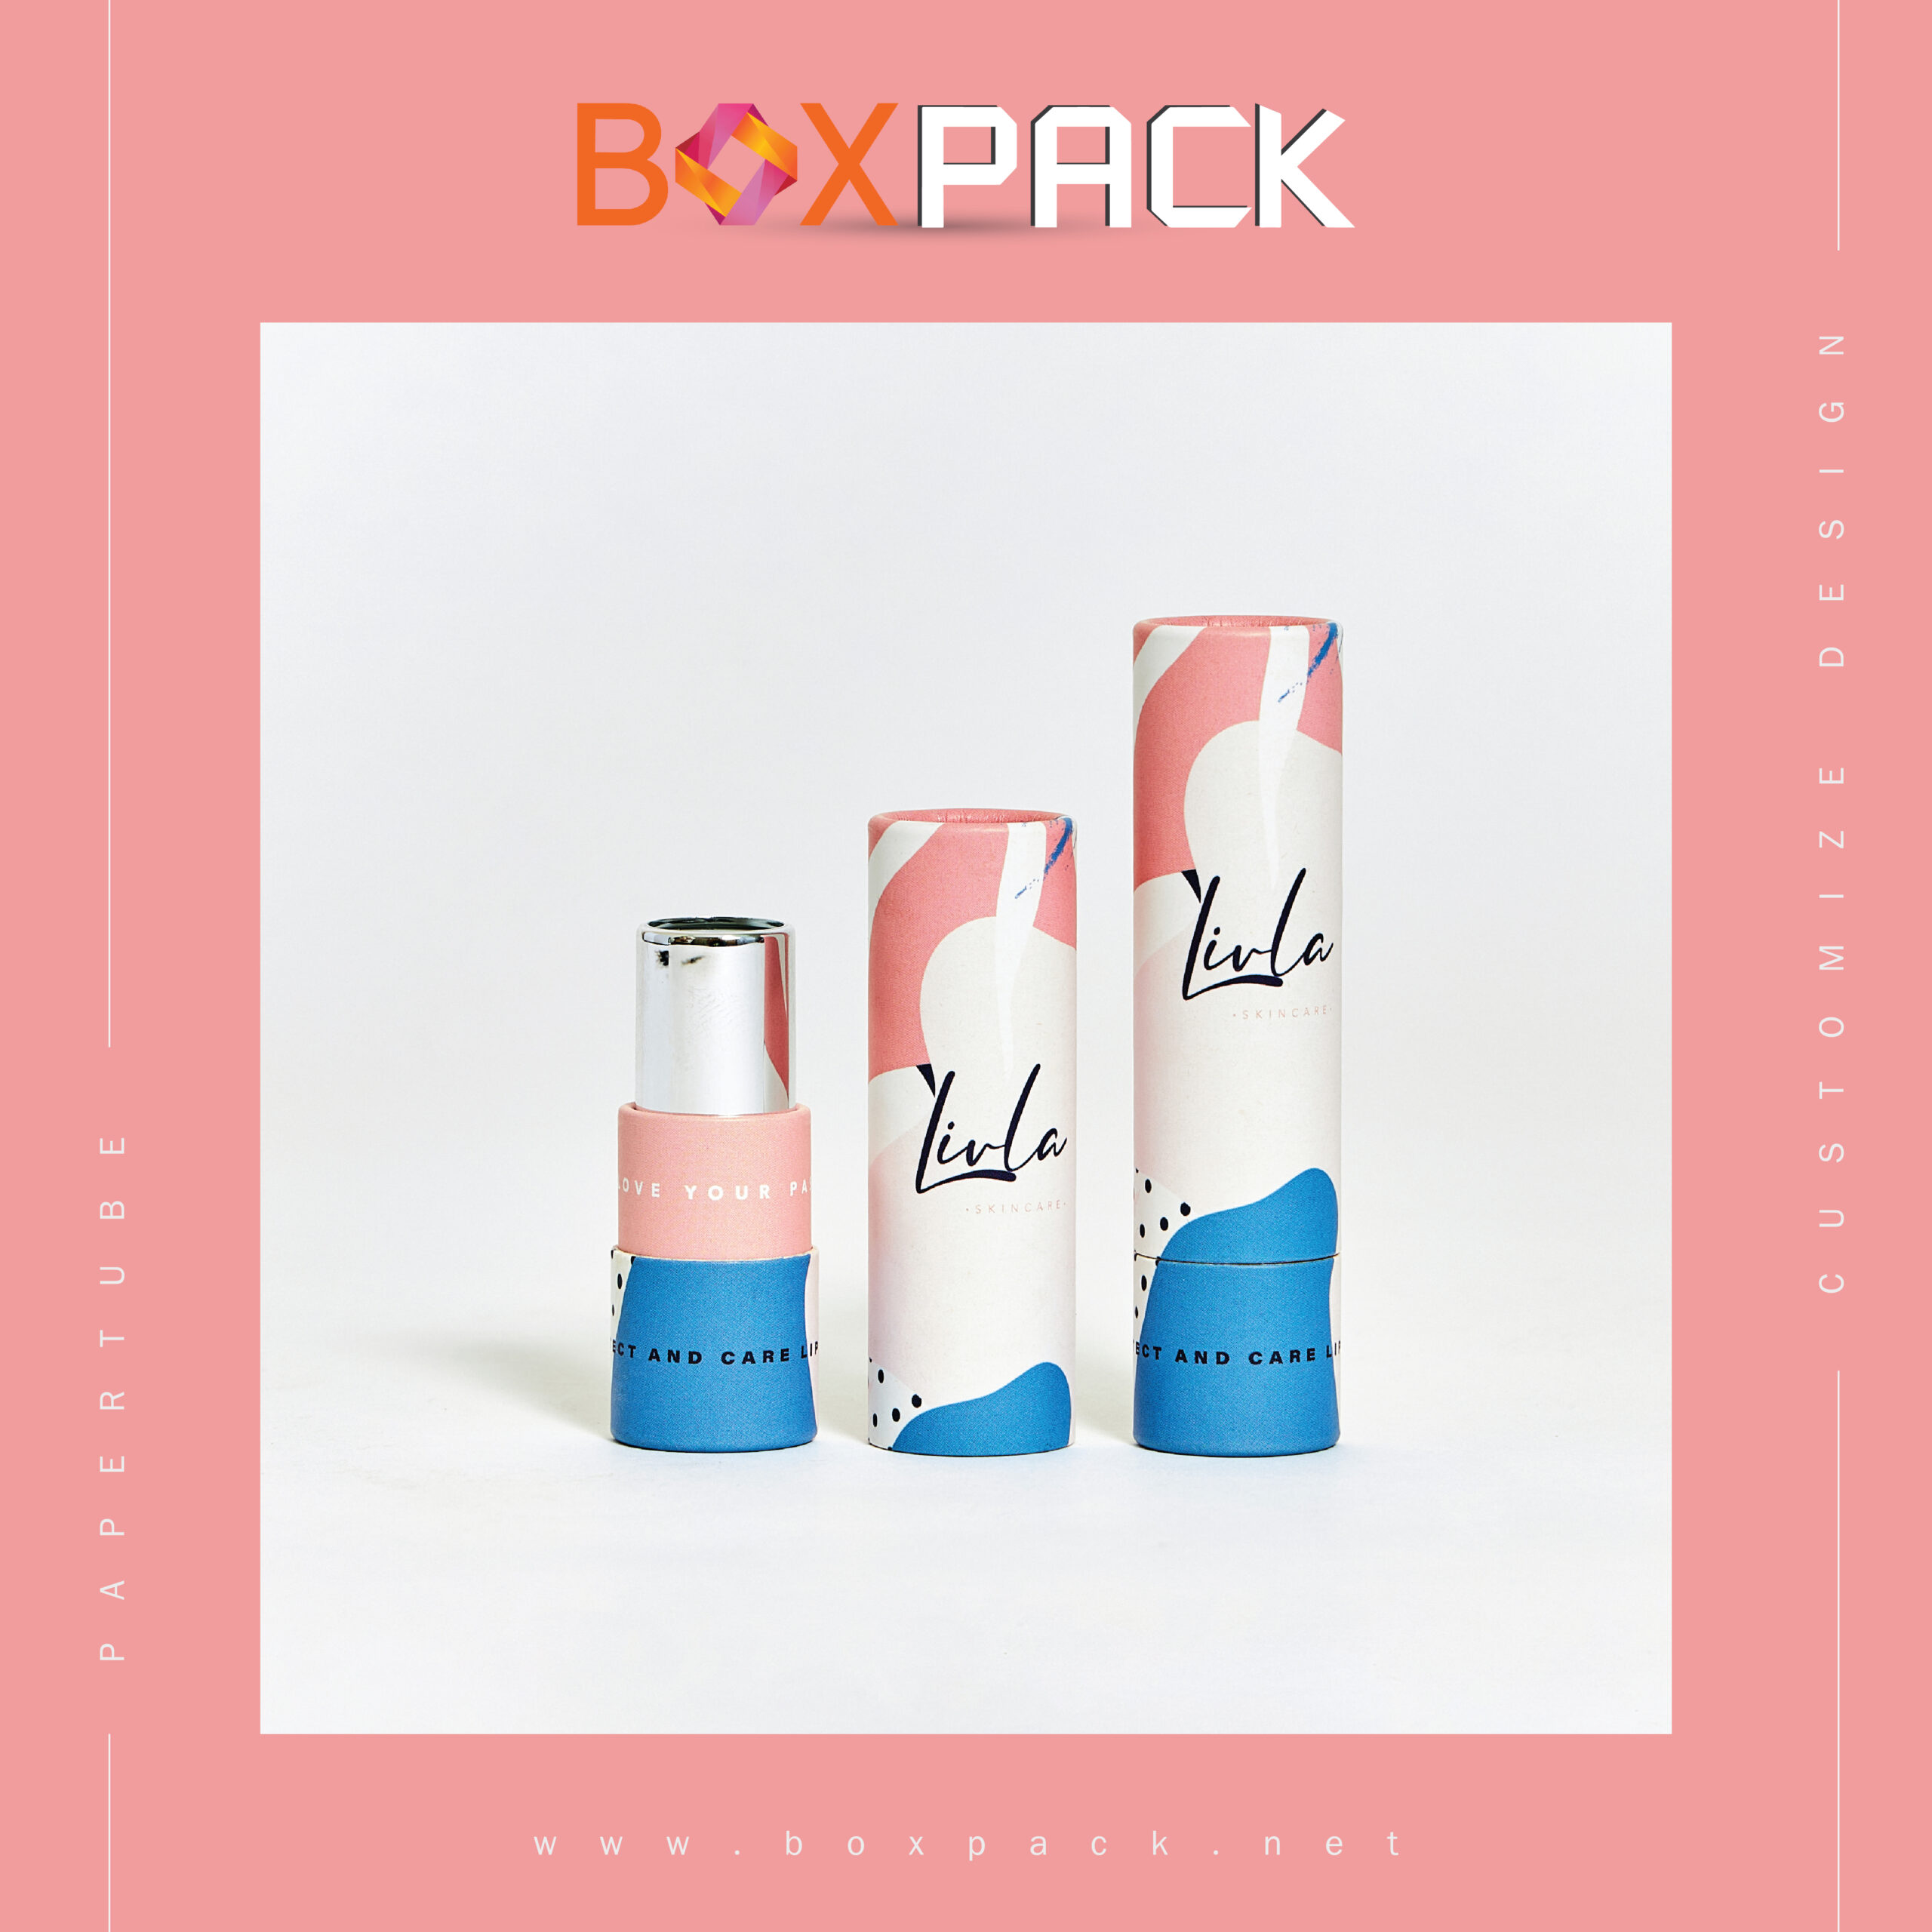 BOXPACK-CONTENT-2-JULY-01-scaled.jpg